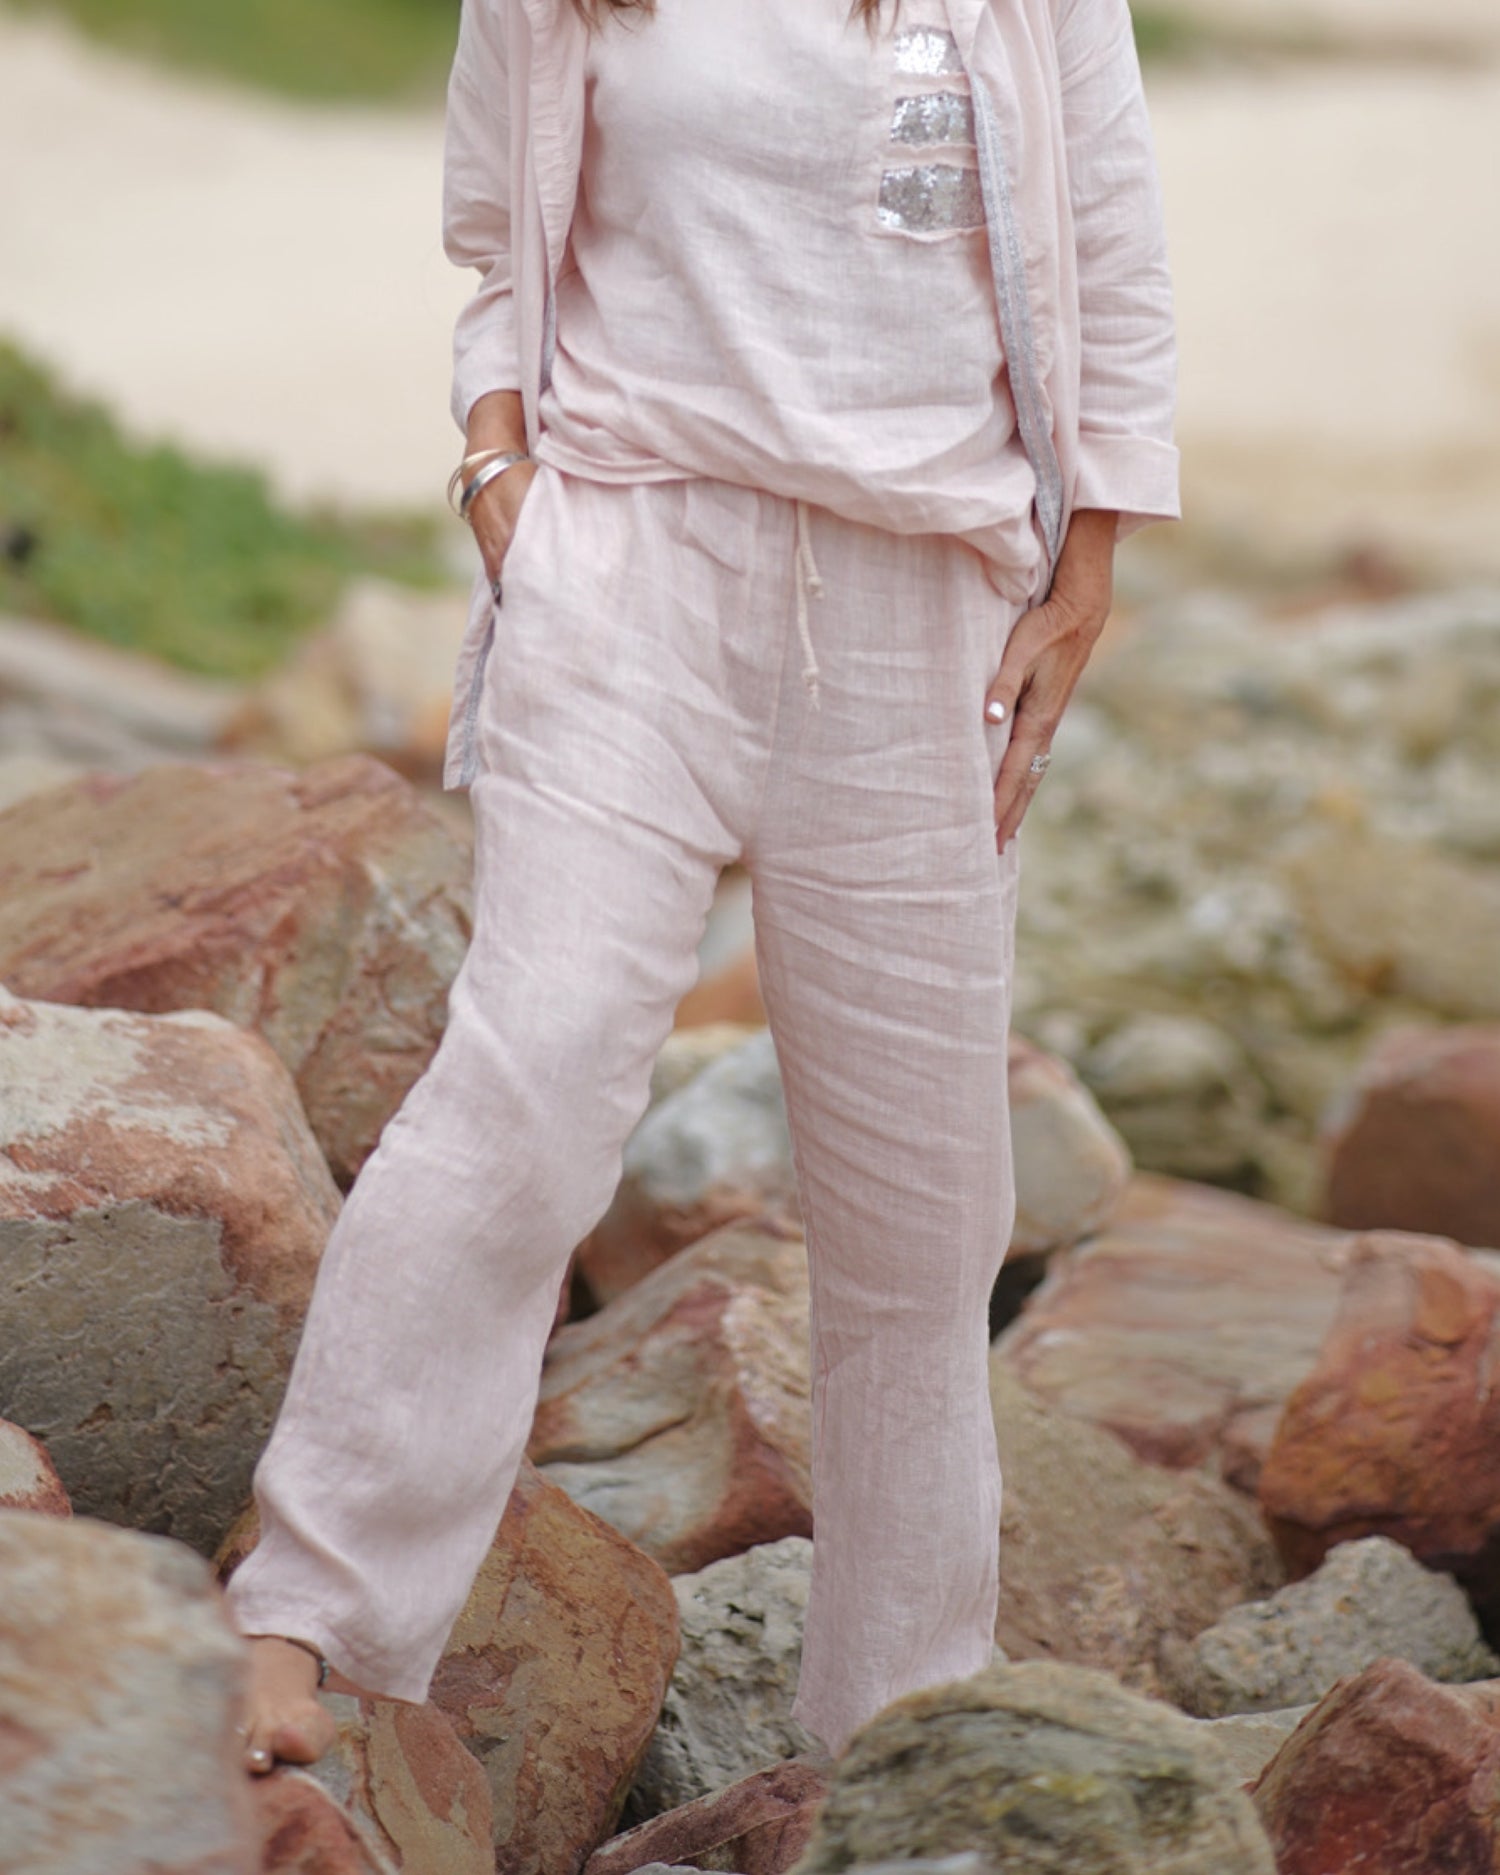 Introducing our latest collection of stylish and comfortable linen pants - a perfect addition to your wardrobe for any season! Crafted with utmost care and attention to detail, these linen pants combine fashion-forward designs with the breathability and natural elegance of premium-quality linen fabric